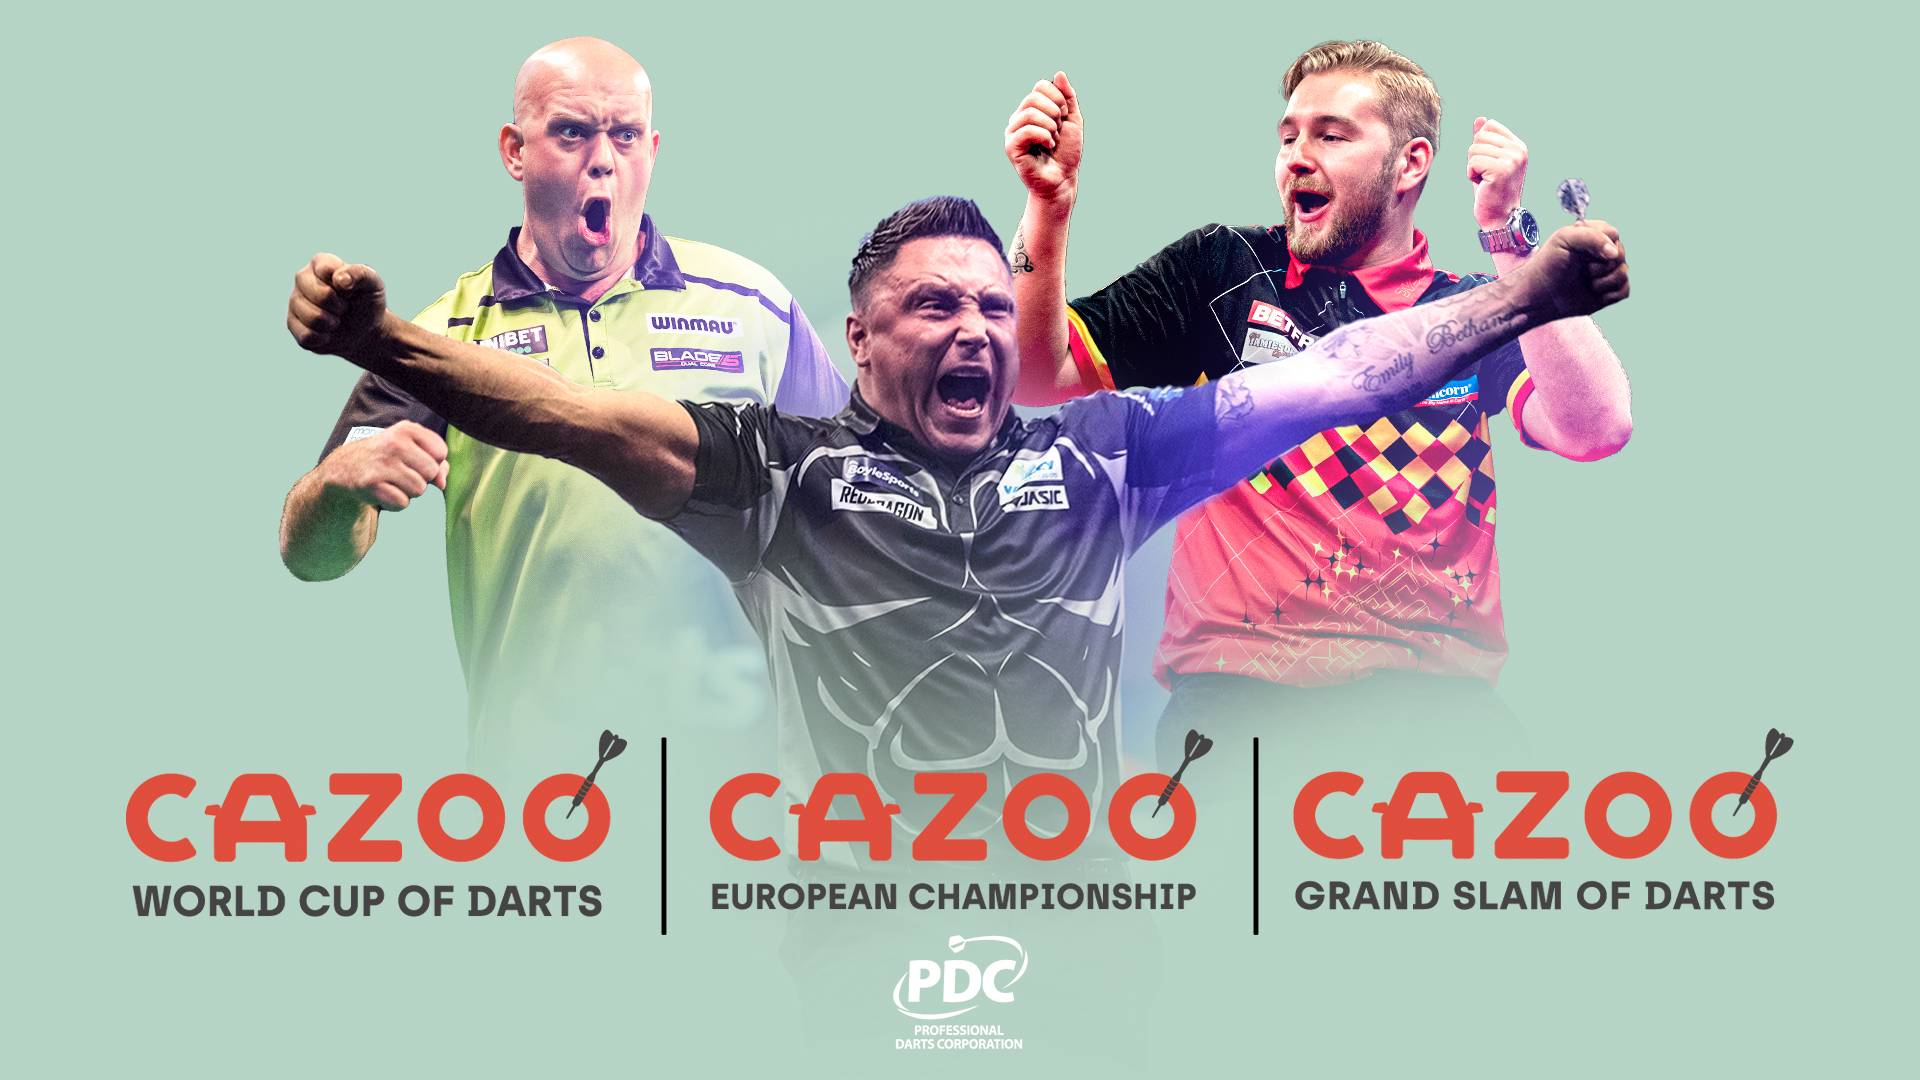 PDC Darts on Twitter: delighted to announce online car retailer @CazooUK as the new title sponsor of three PDC events Cazoo World Cup of Darts Cazoo European Championship Cazoo Grand Slam